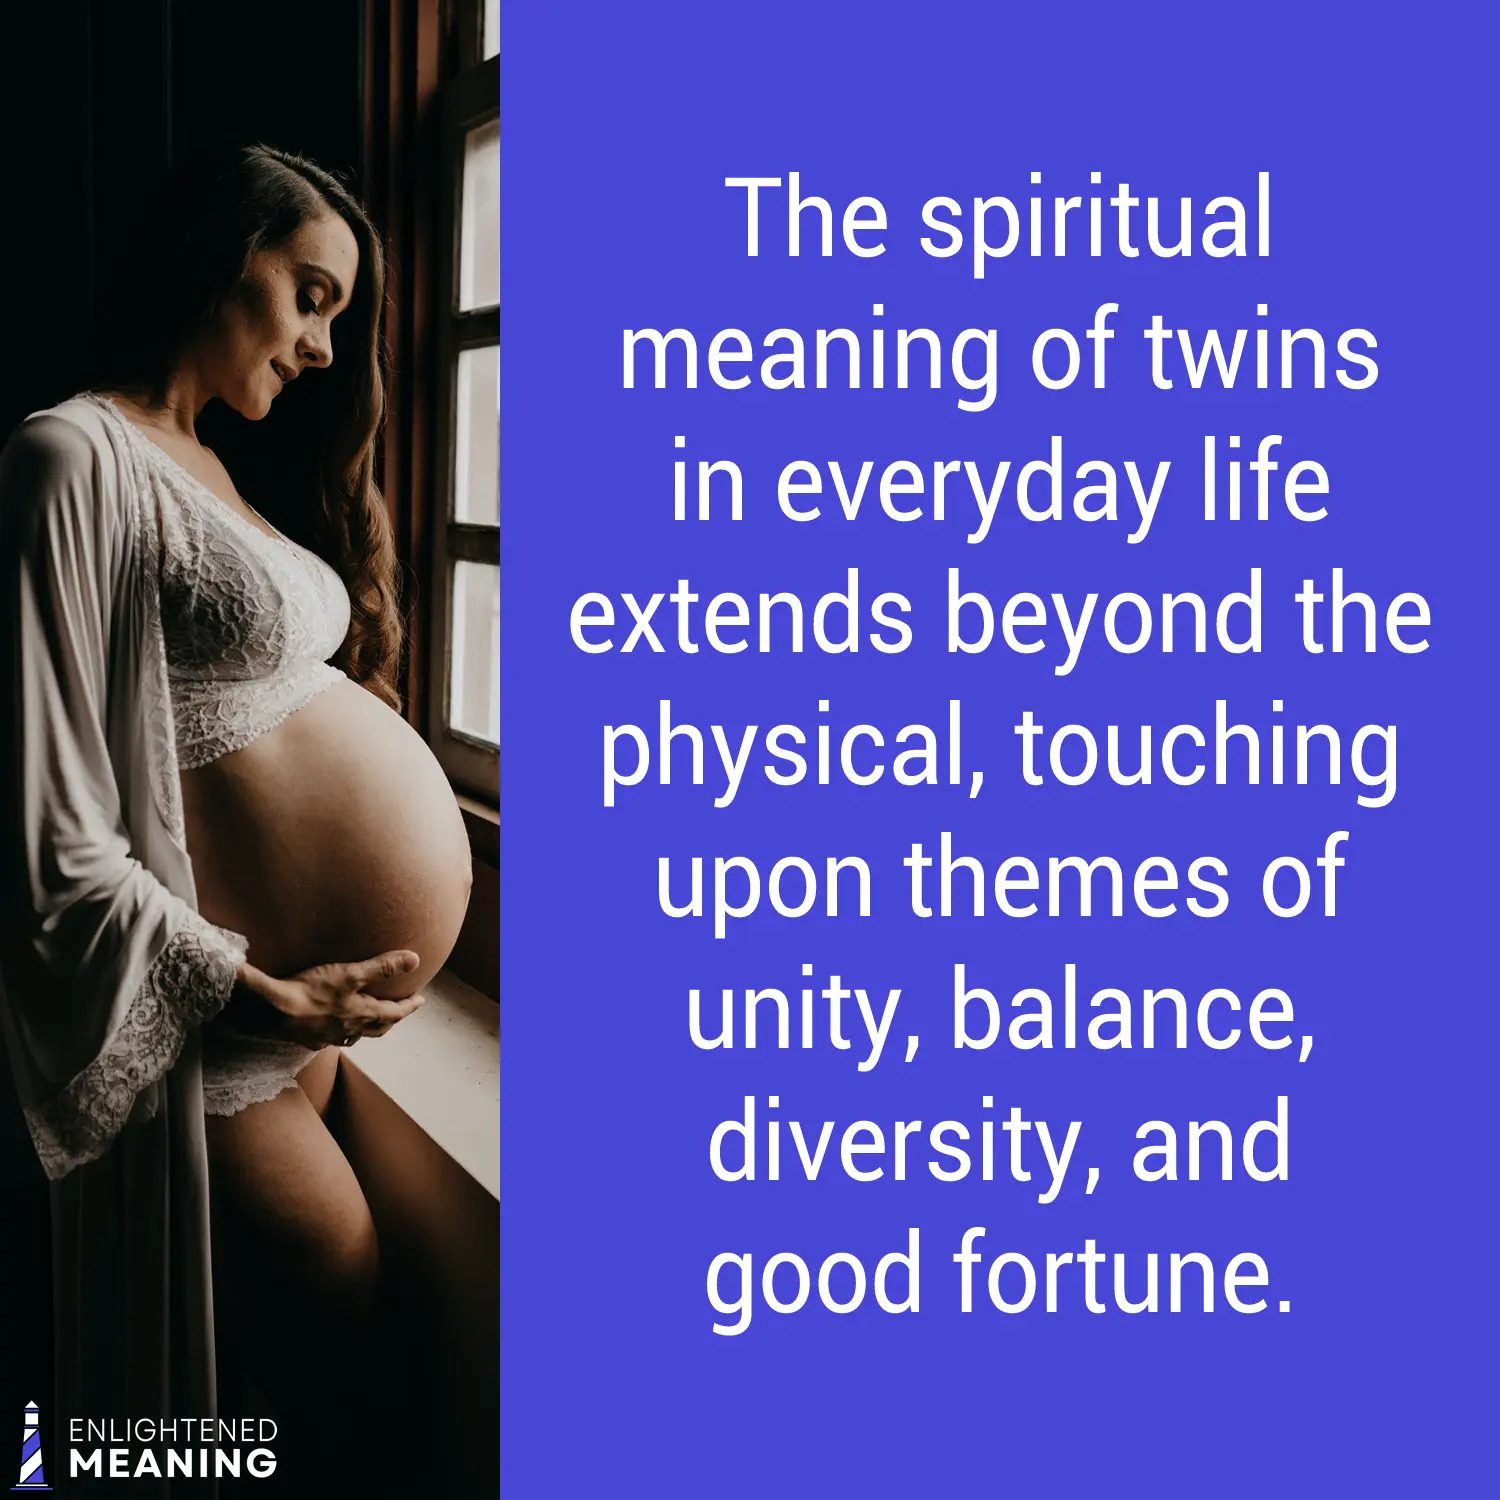 What is the spiritual meaning of twins